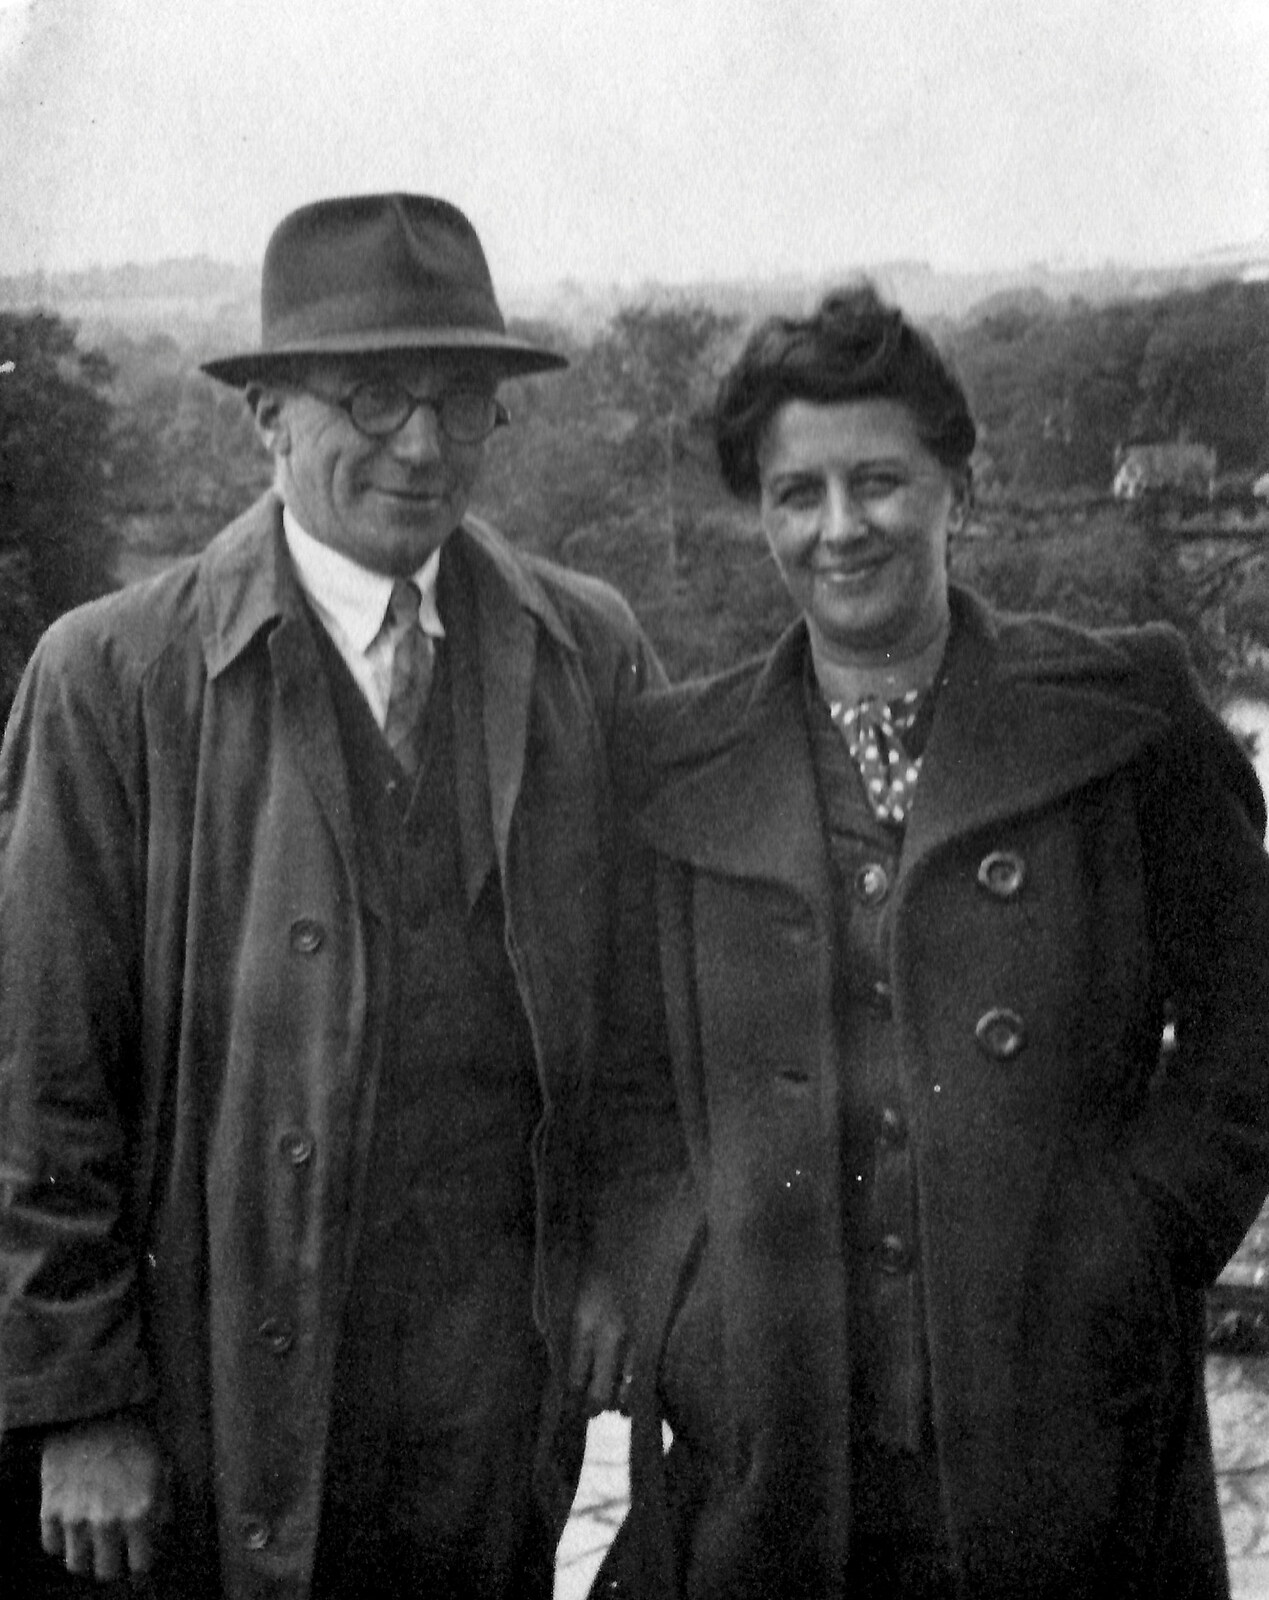 Family History: The 1940s and 1950s - 24th January 2020: John and Elsie